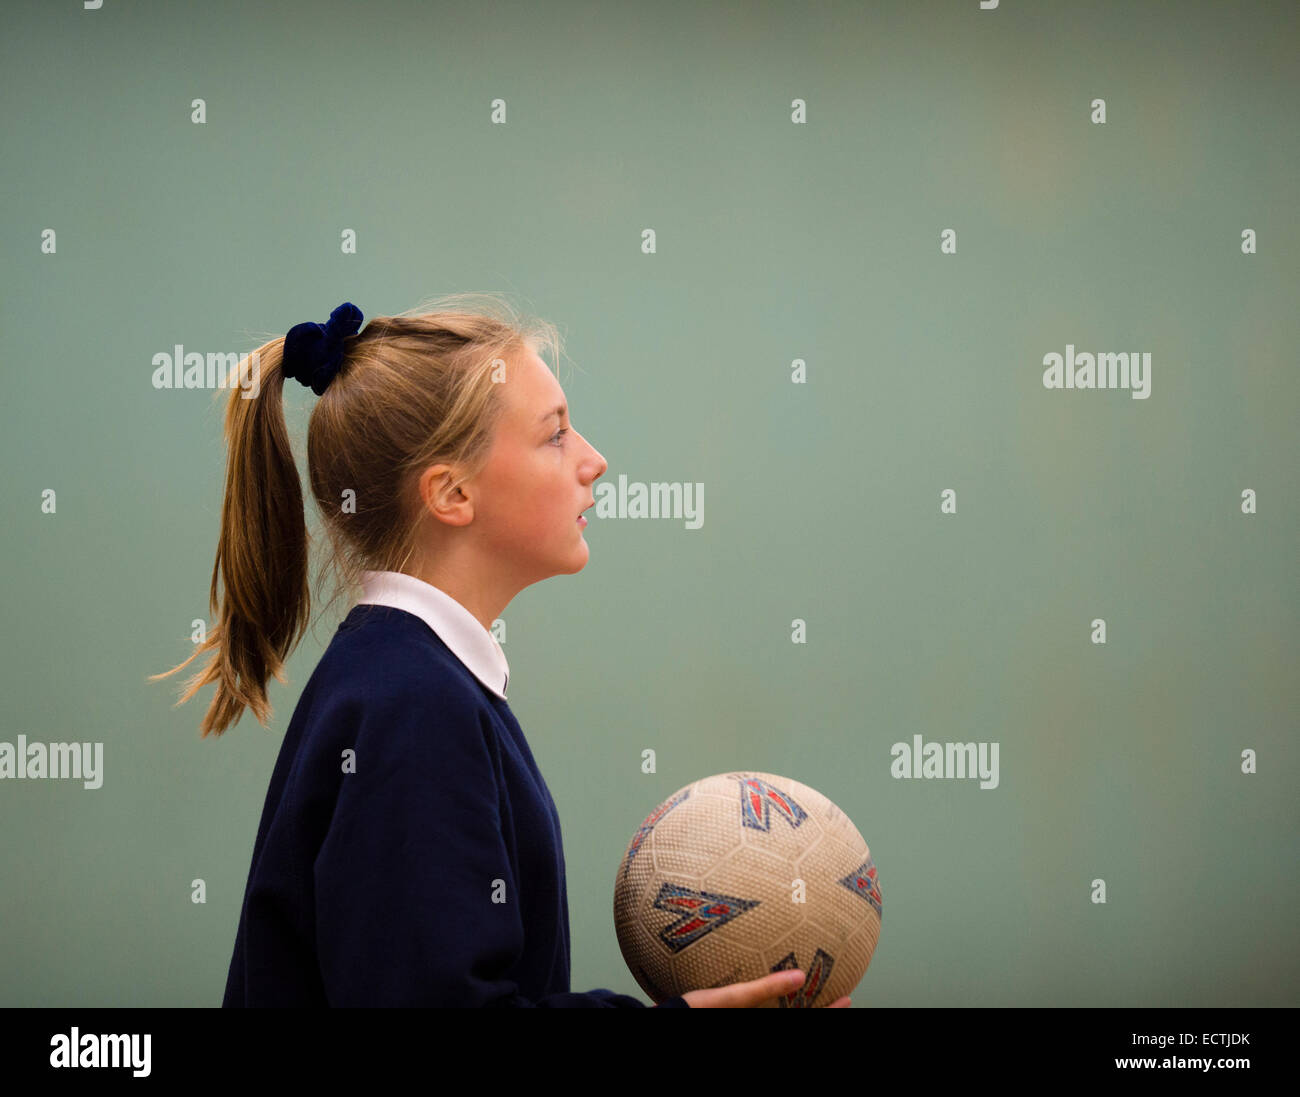 Secondary school physical education Wales UK:  a teenage girl in profile playing a ball game netball basketball holding a ball in the  gymnasium, her hair in a ponytail Stock Photo